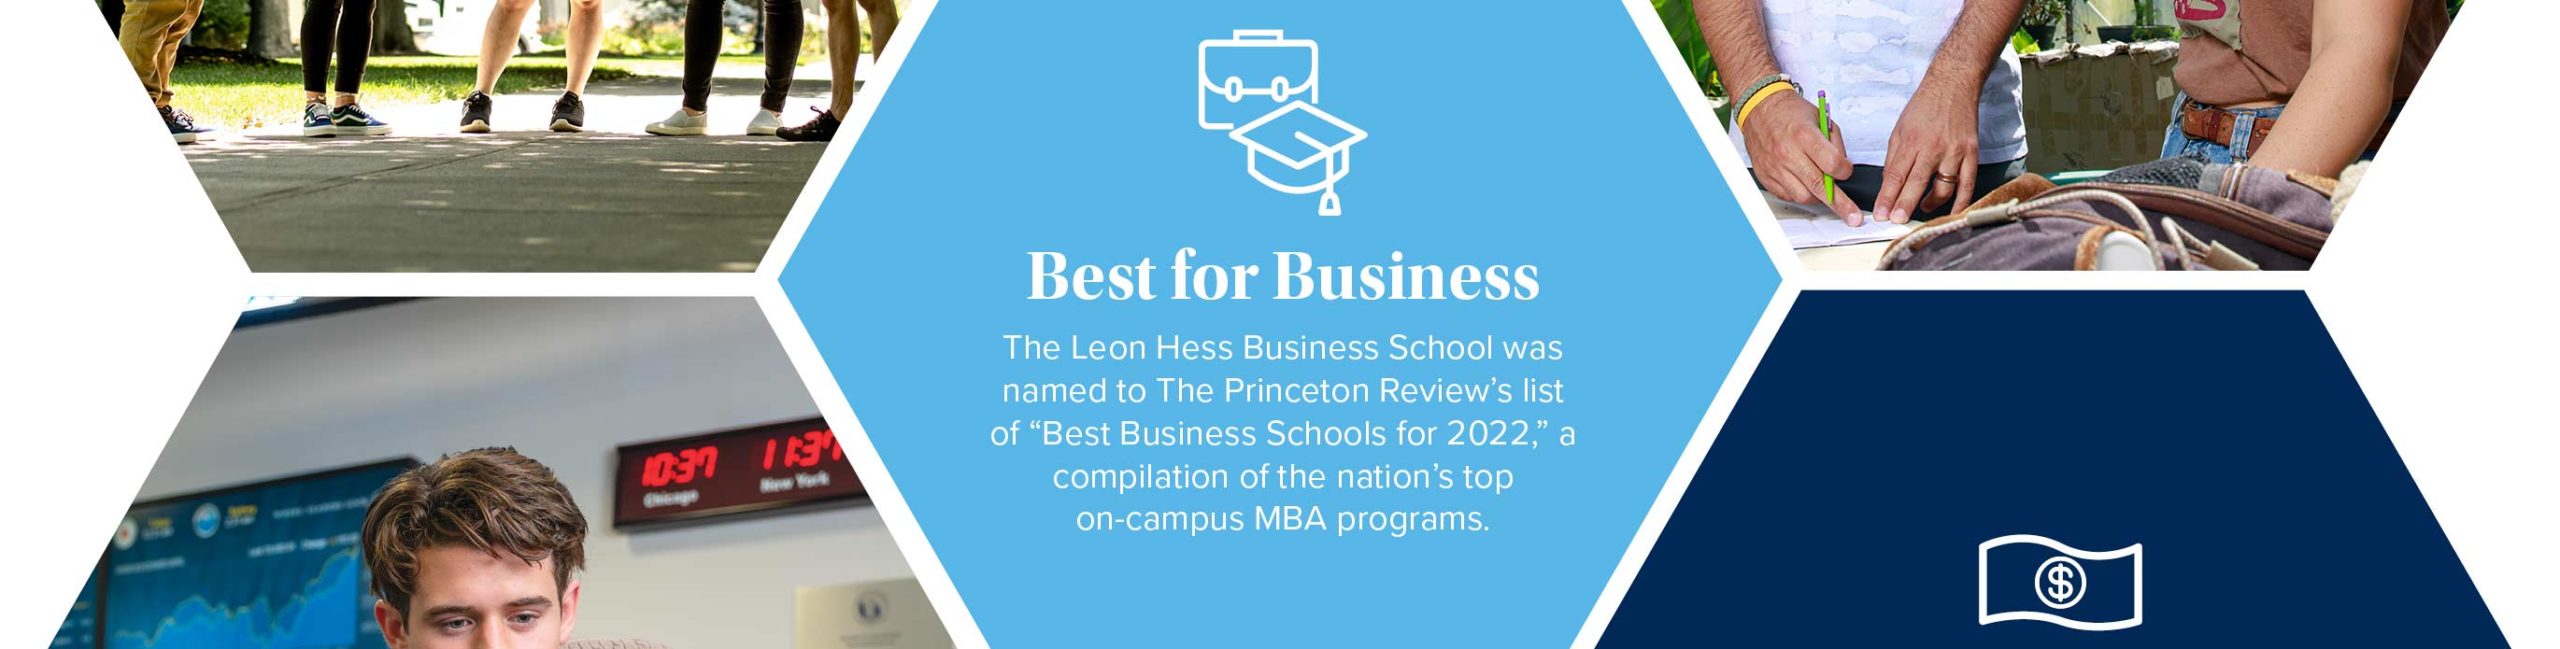 Best for Business The Leon Hess Business School was named to The Princeton Review’s list of “Best Business Schools for 2022,” a compilation of the nation’s top on-campus MBA programs.